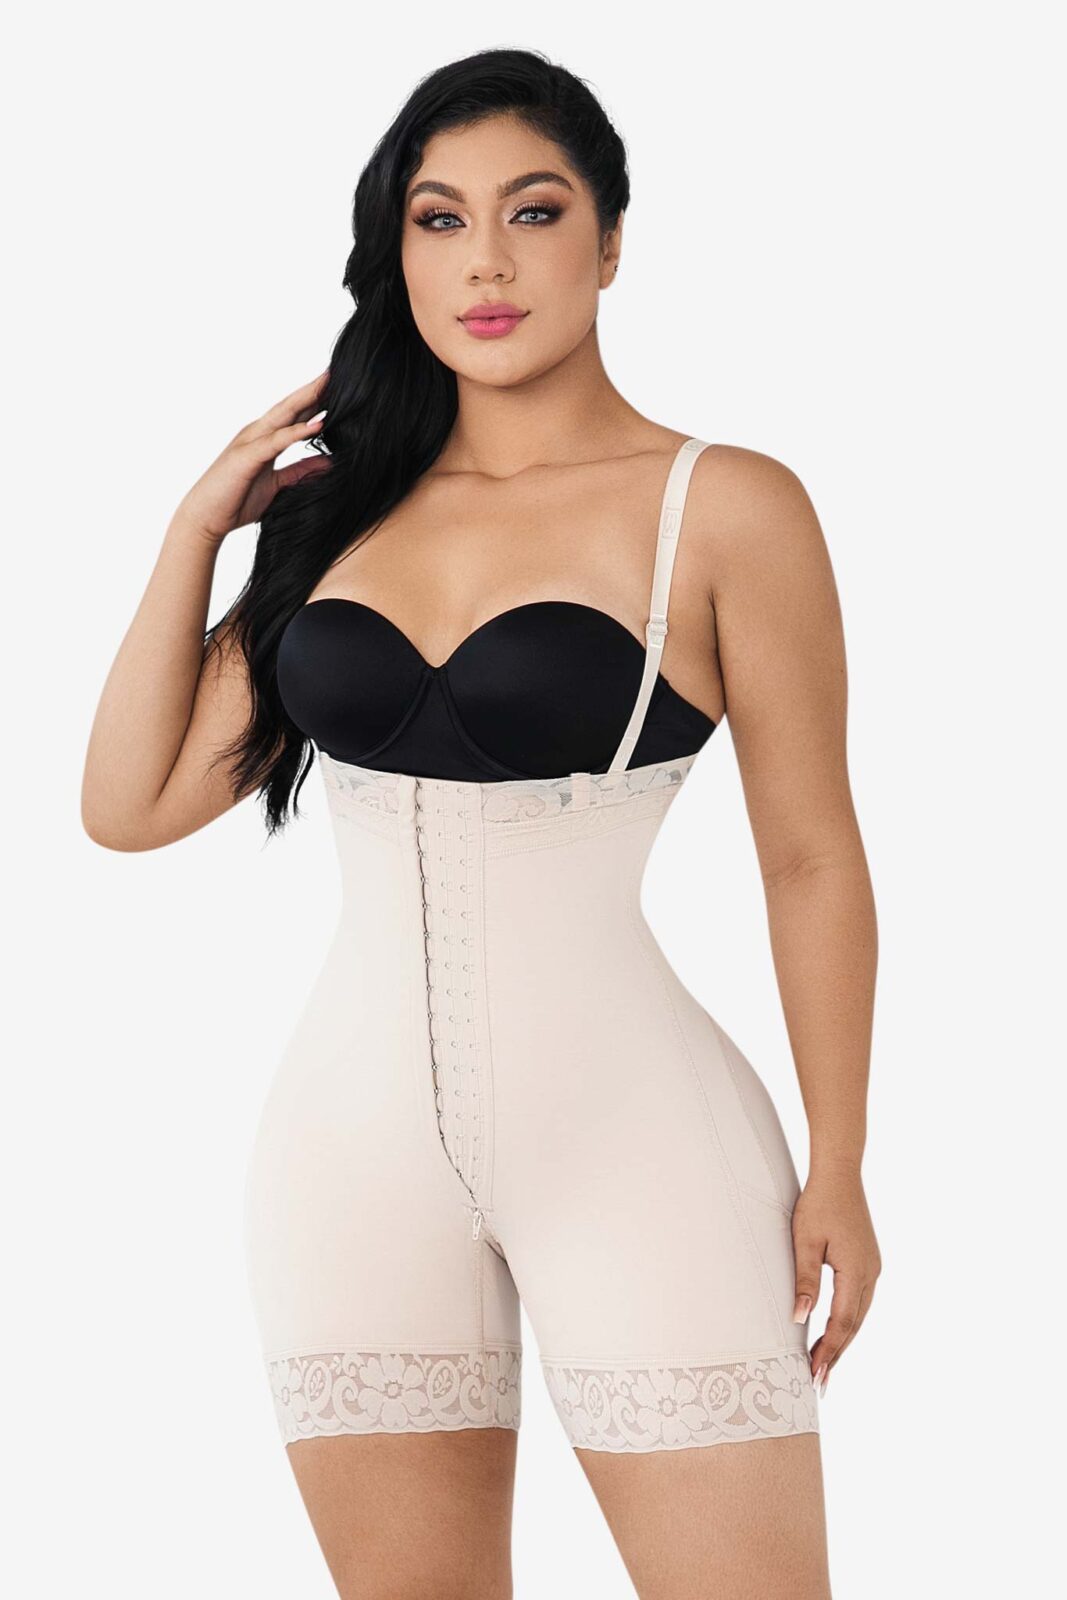 SKINTEX Full Control Body Shaper with Sleeves – Shop – Moldeate Shop